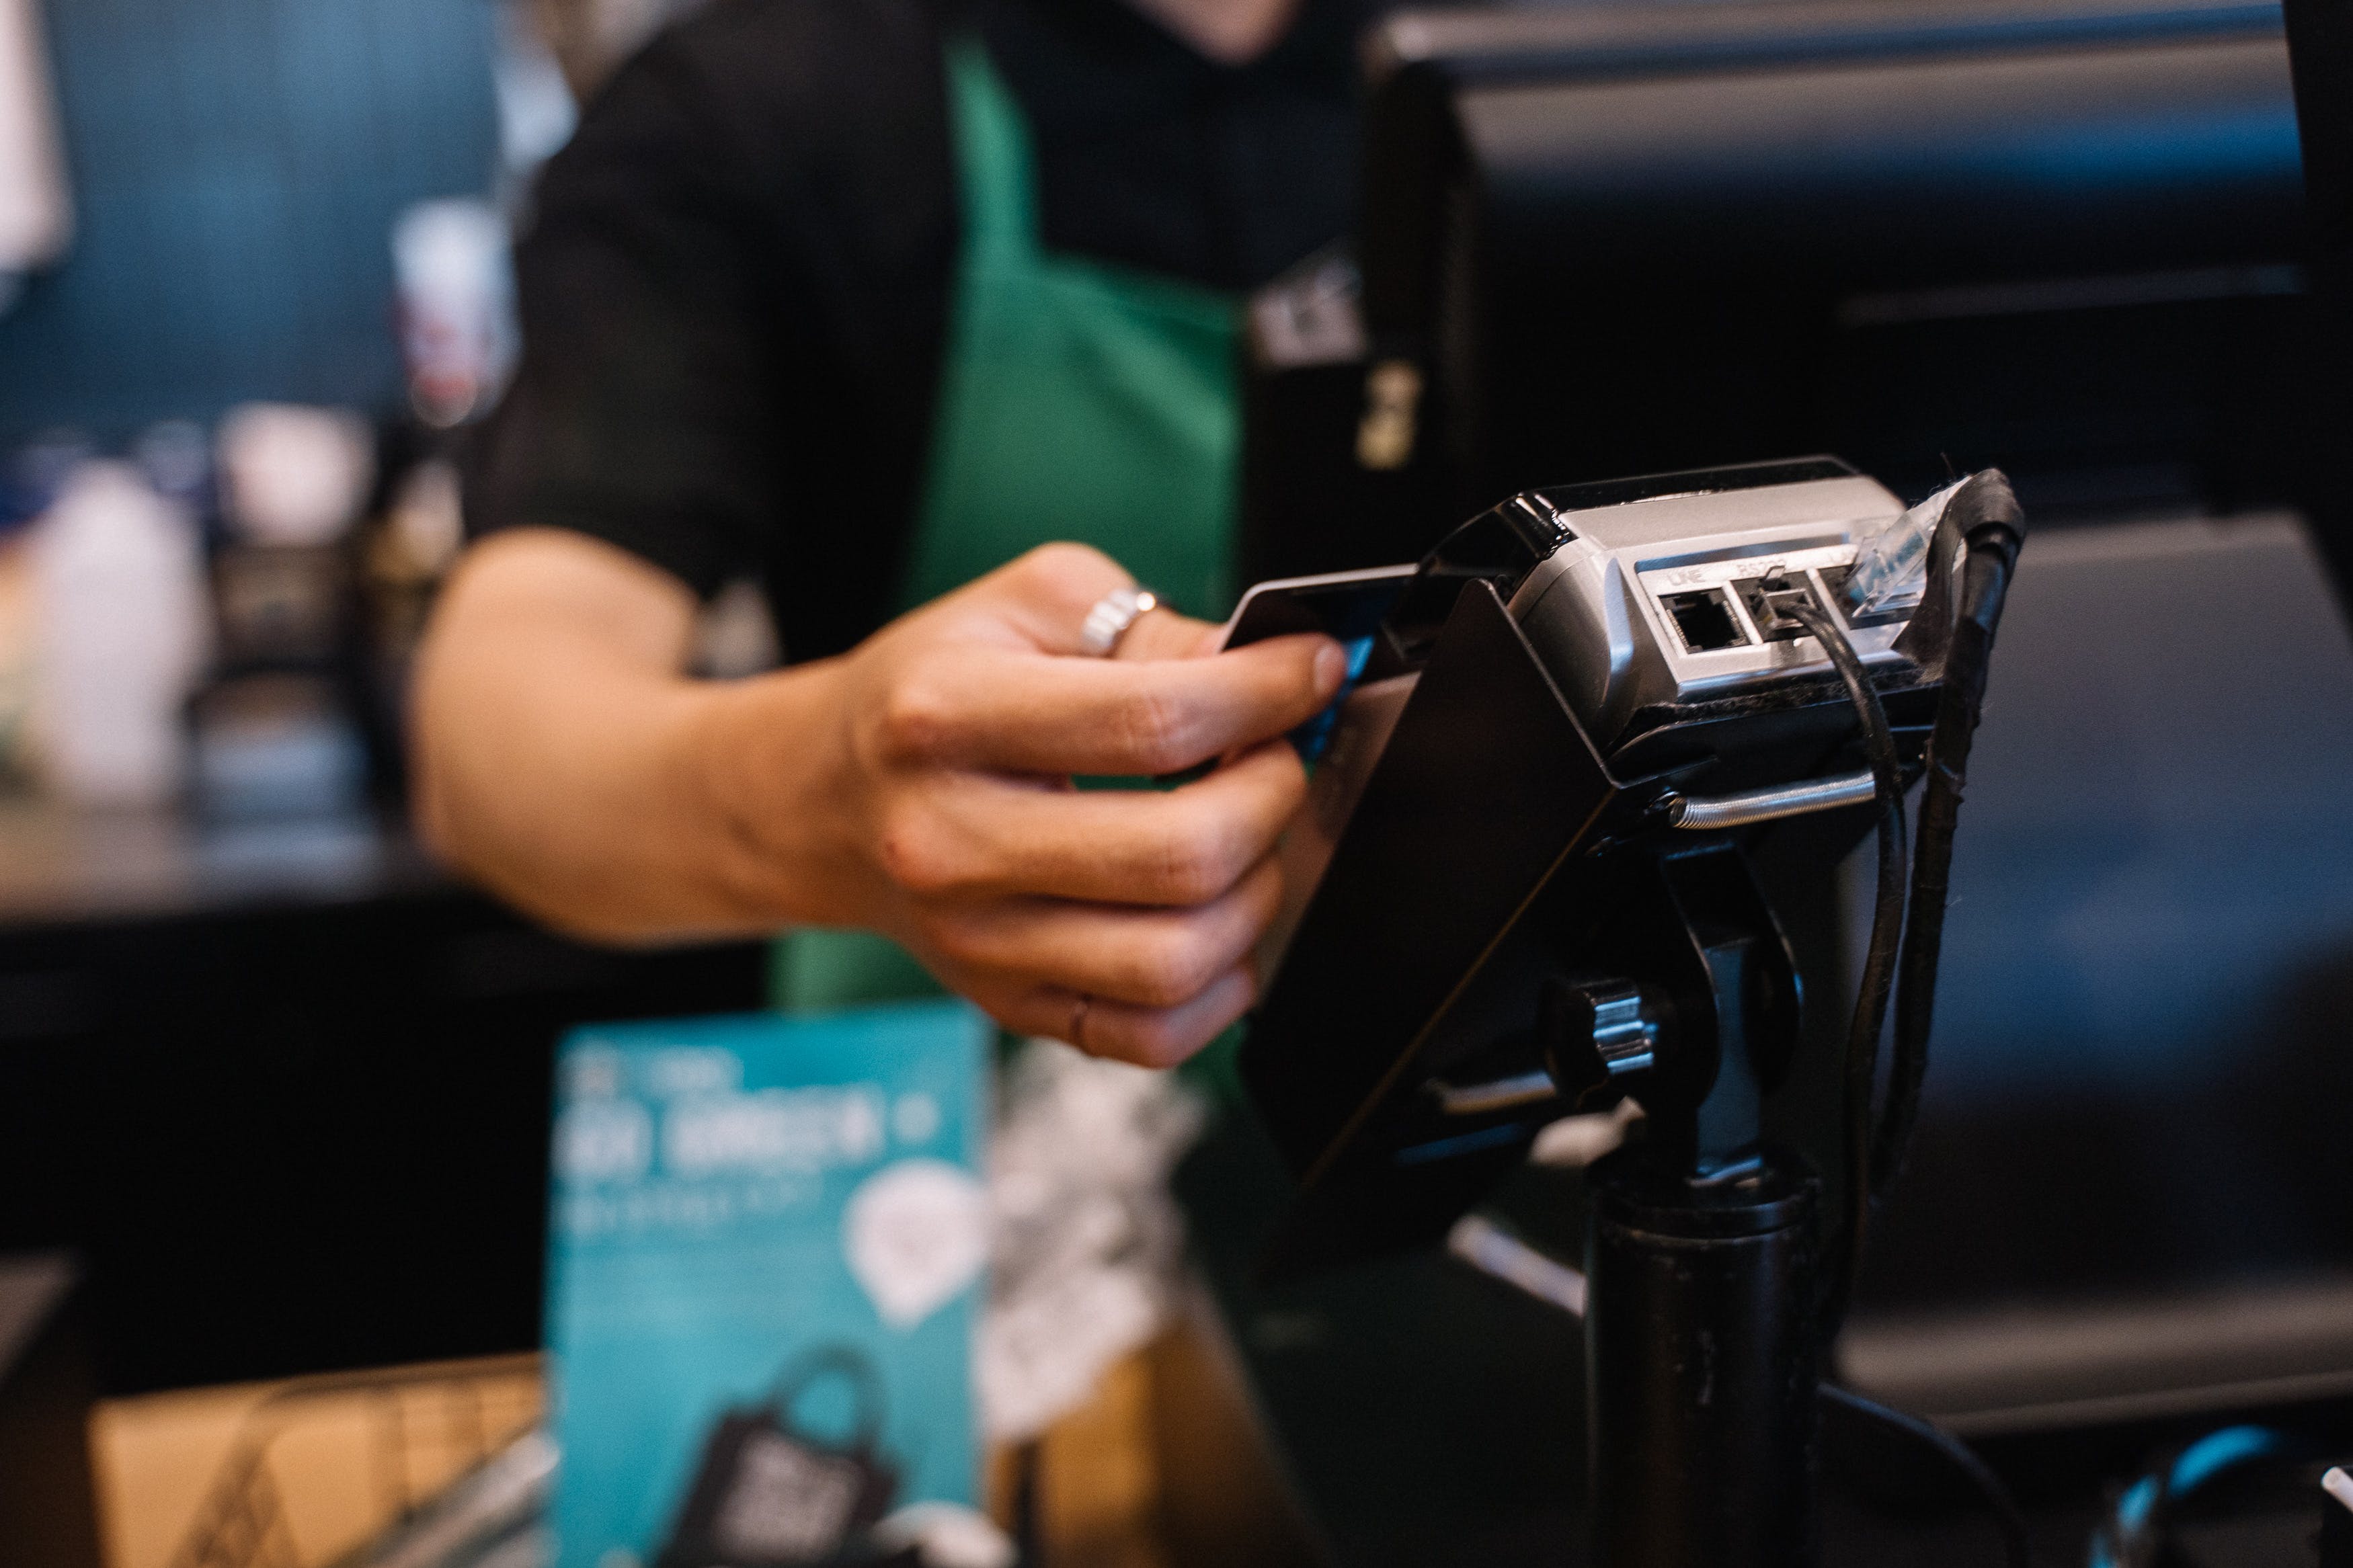 A barista inserting a card into a payment terminal | Source: Pexels